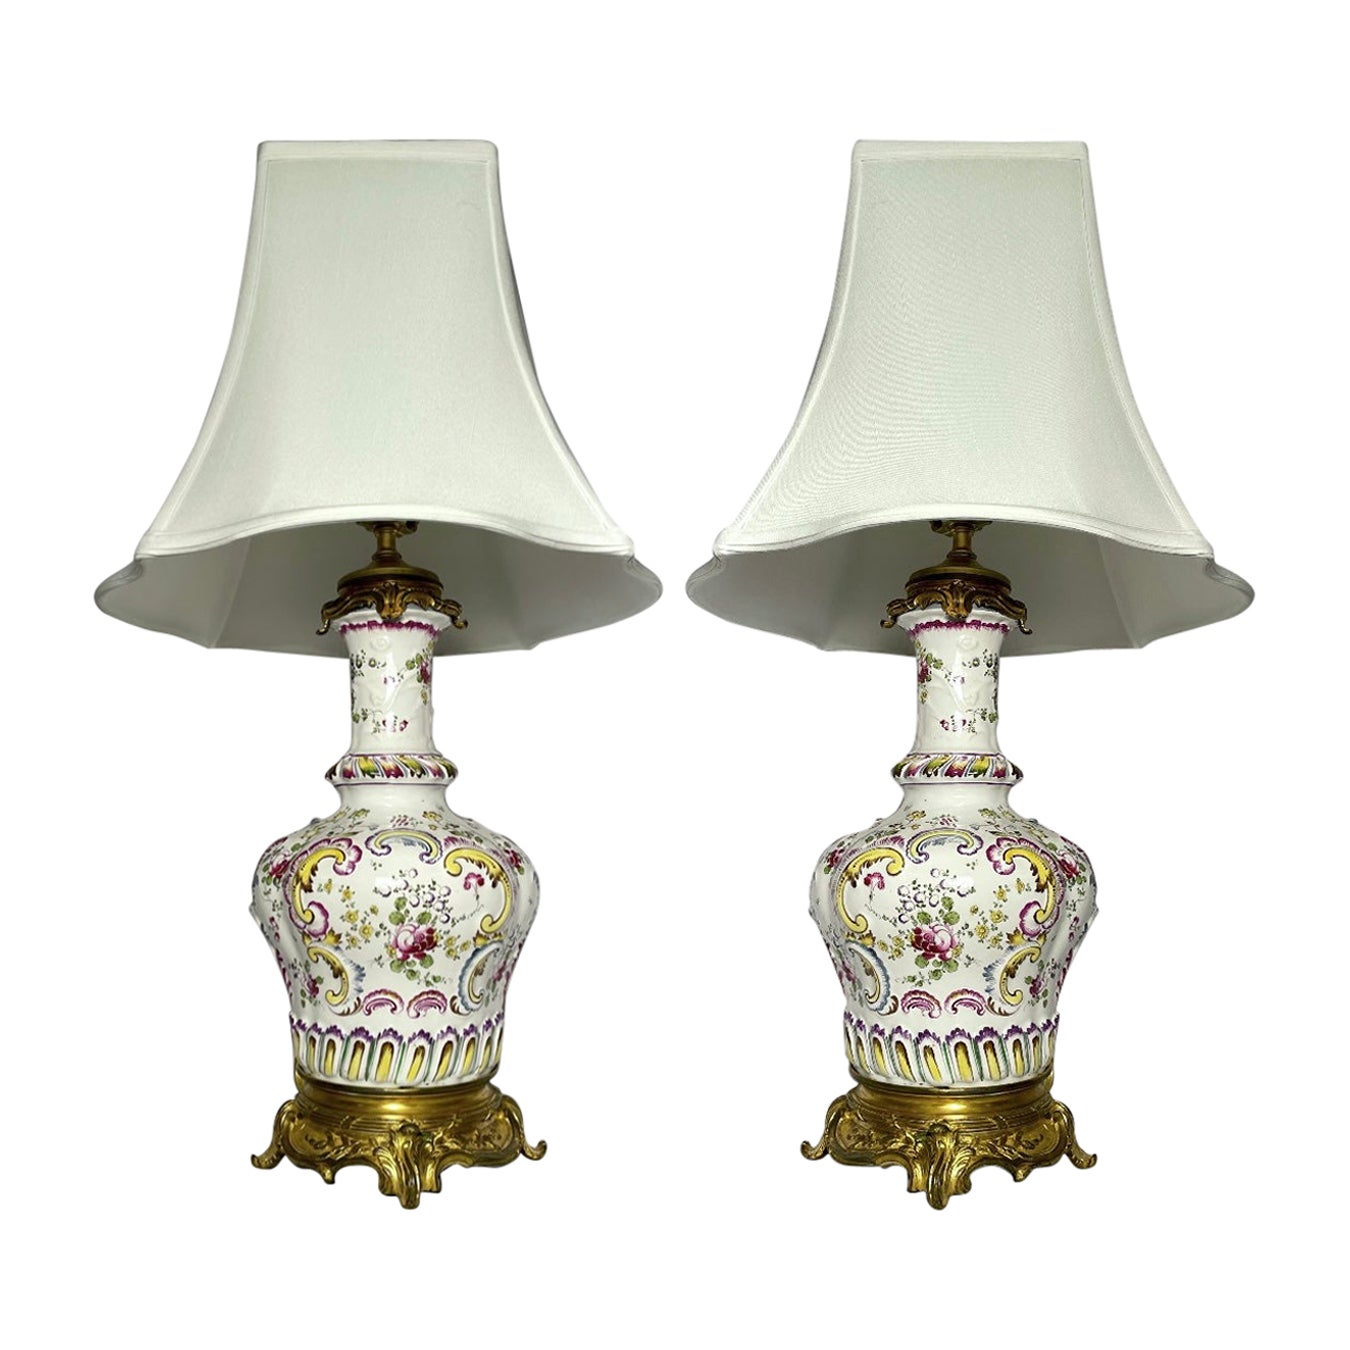 Antique French Porcelain and Gold Bronze Mounted Lamps, circa 1890. For Sale